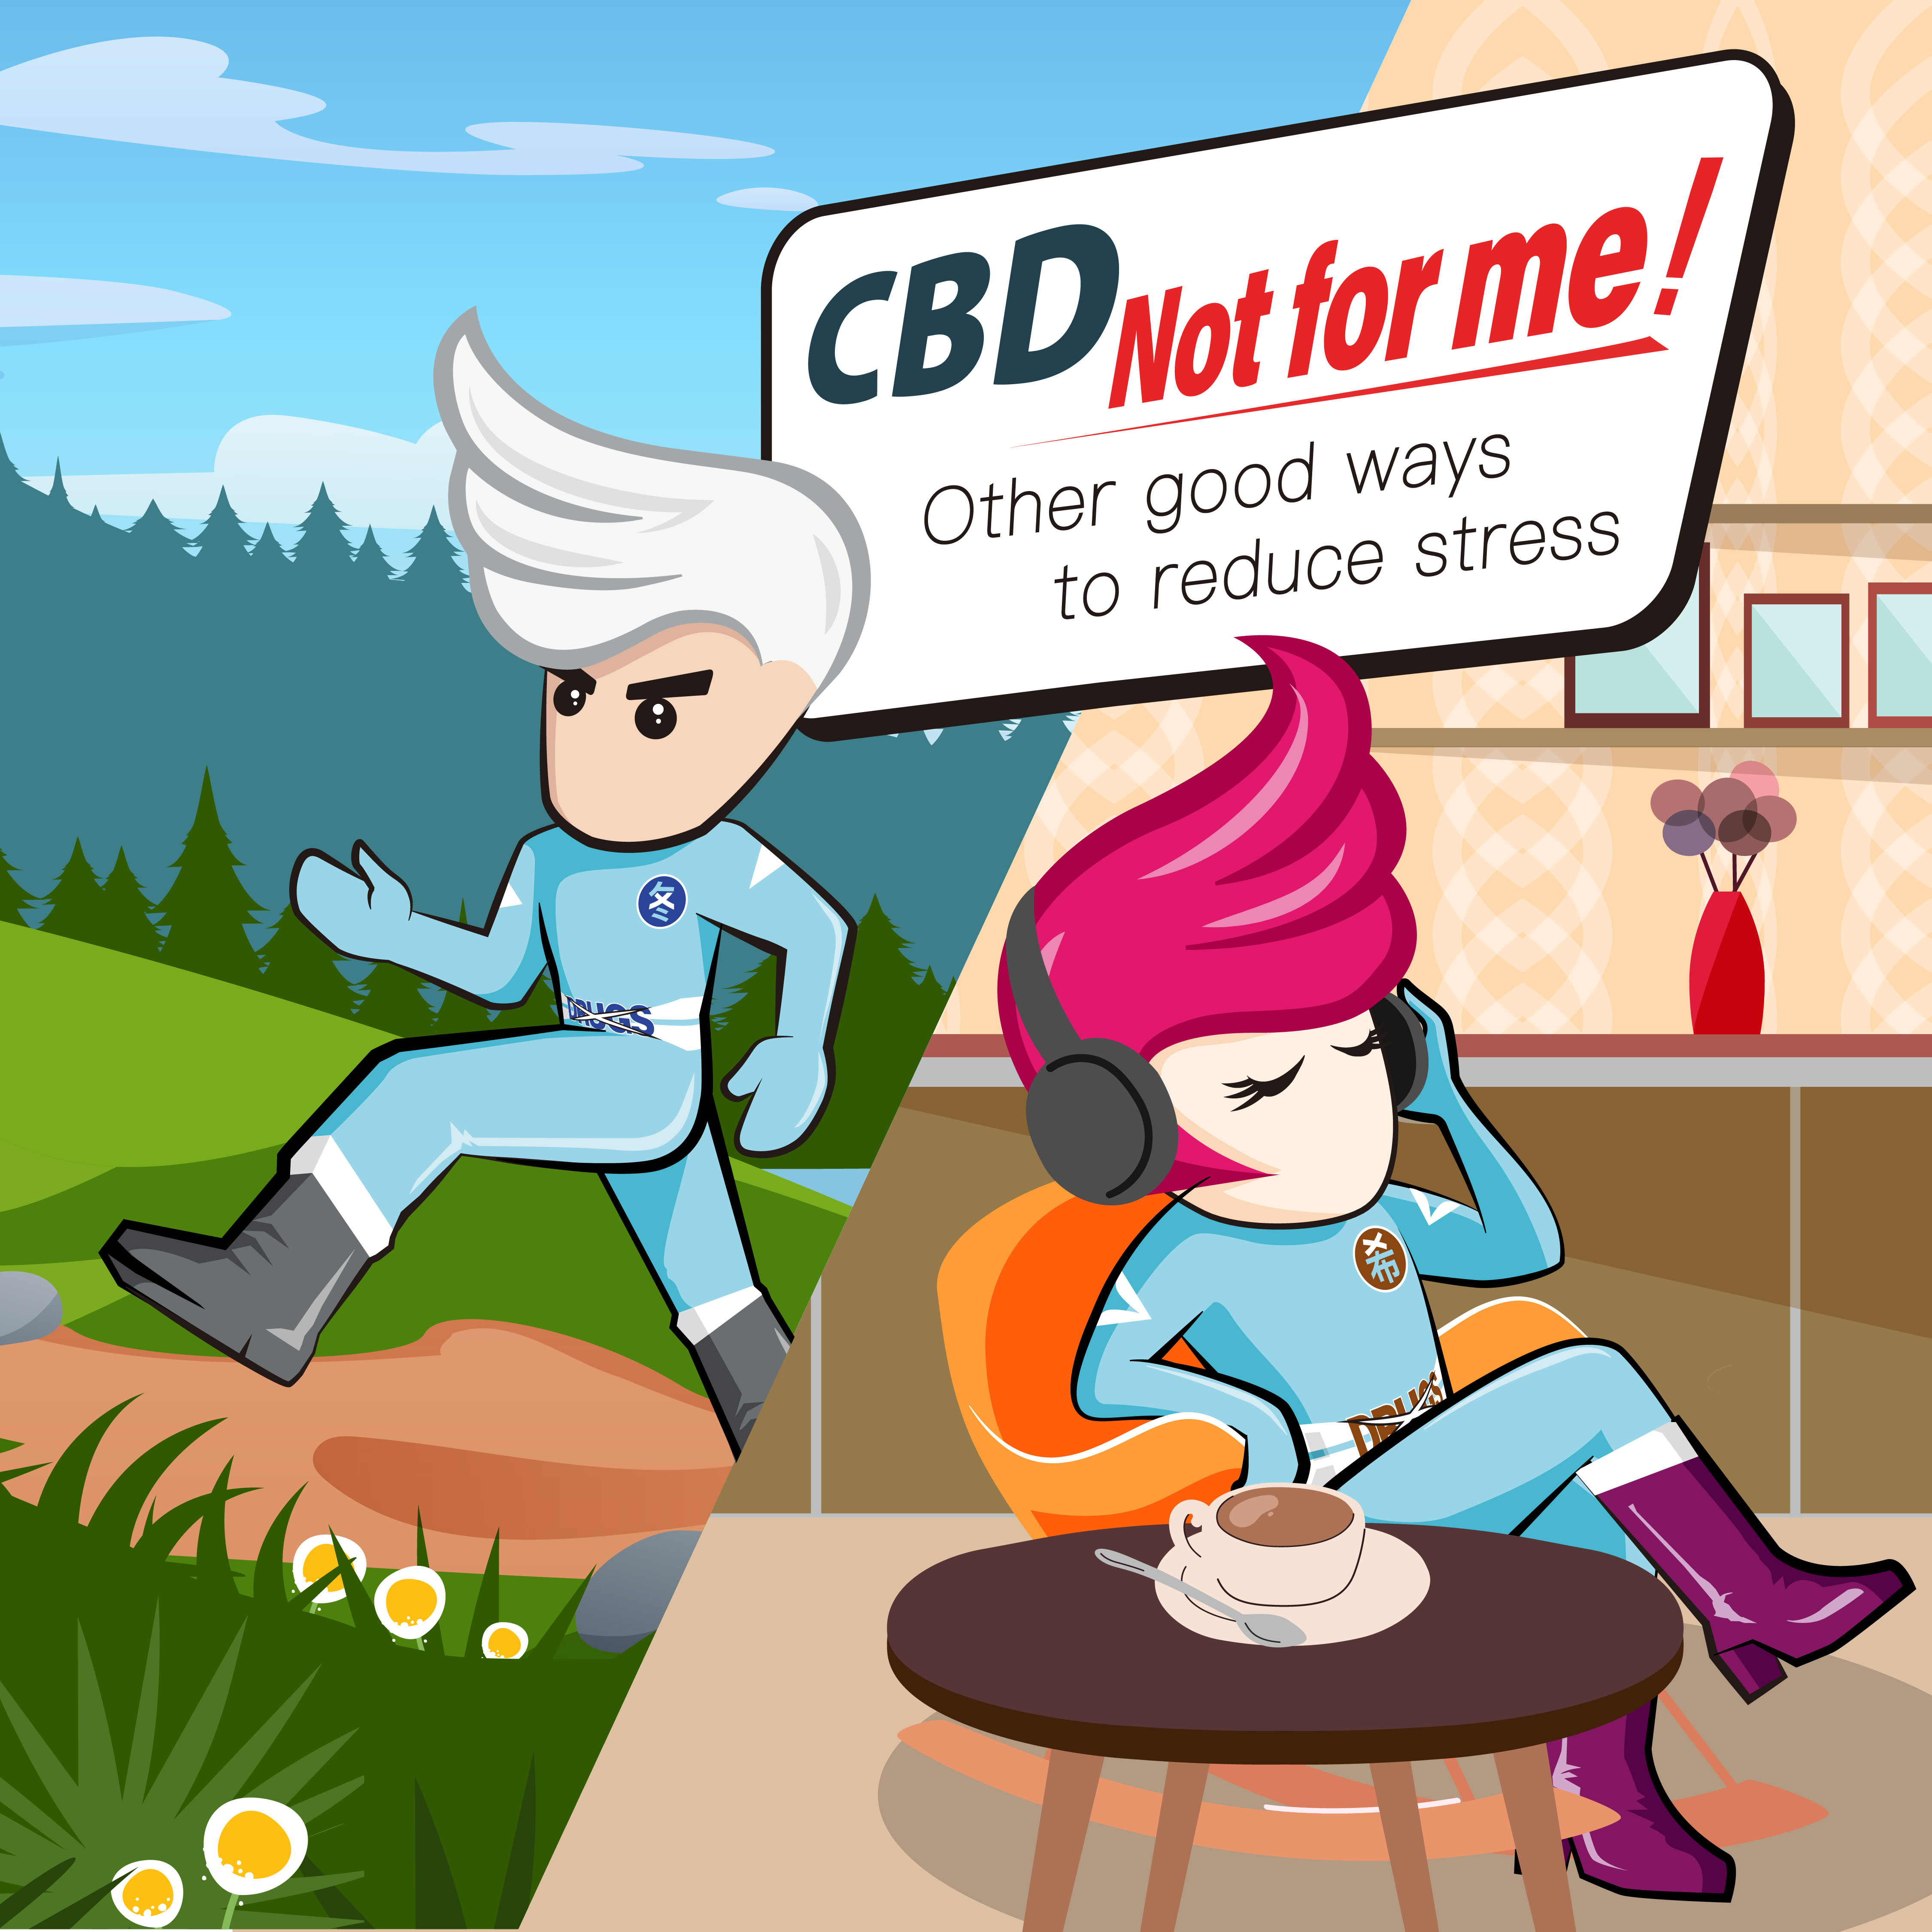 CBD, Not for me!
Other good ways to reduce stress
